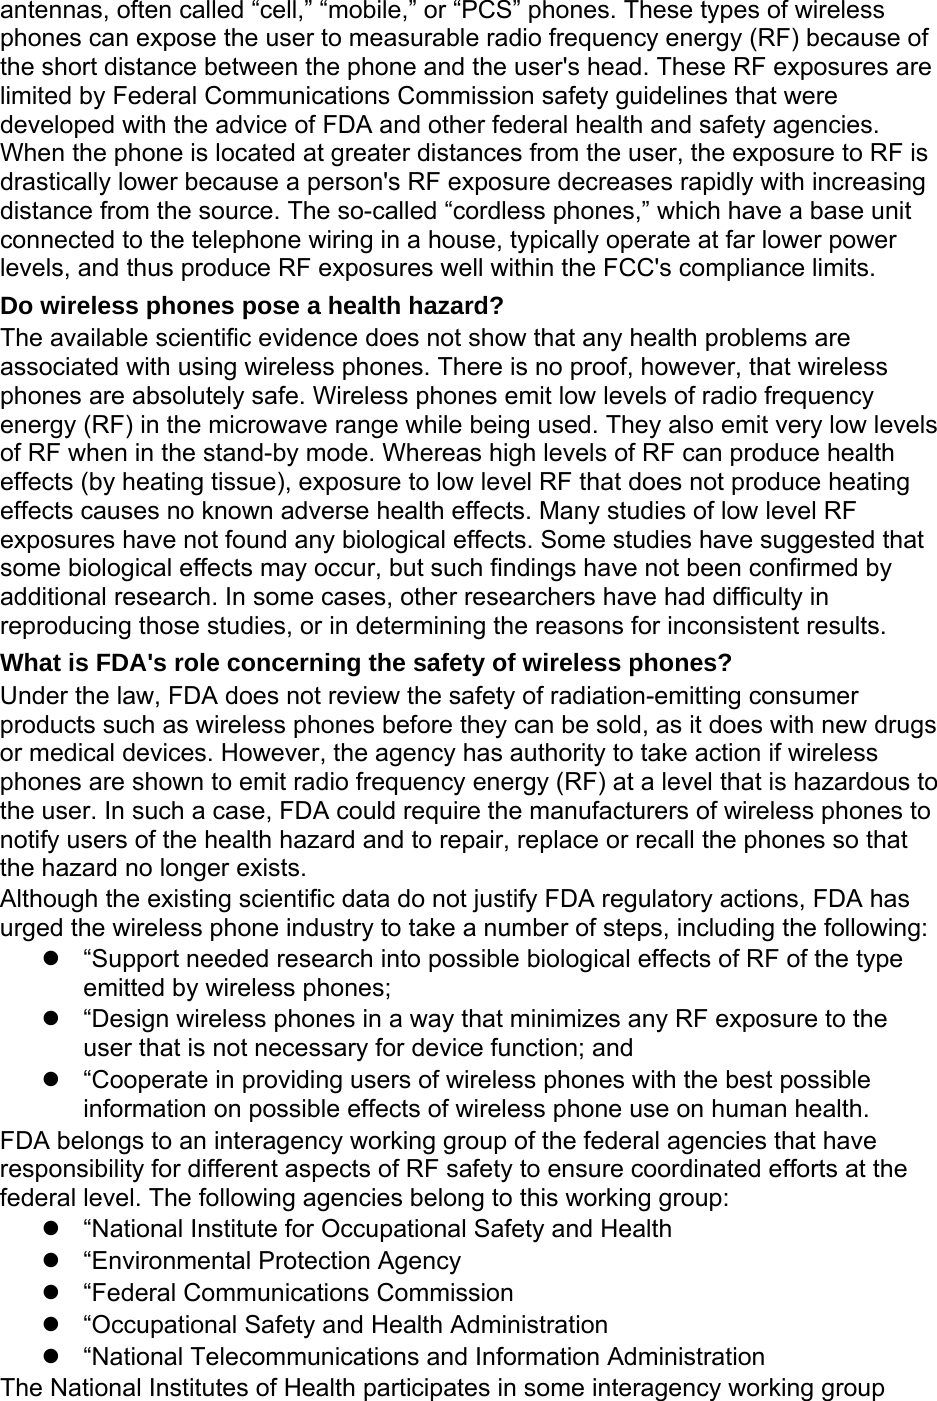 antennas, often called “cell,” “mobile,” or “PCS” phones. These types of wireless phones can expose the user to measurable radio frequency energy (RF) because of the short distance between the phone and the user&apos;s head. These RF exposures are limited by Federal Communications Commission safety guidelines that were developed with the advice of FDA and other federal health and safety agencies. When the phone is located at greater distances from the user, the exposure to RF is drastically lower because a person&apos;s RF exposure decreases rapidly with increasing distance from the source. The so-called “cordless phones,” which have a base unit connected to the telephone wiring in a house, typically operate at far lower power levels, and thus produce RF exposures well within the FCC&apos;s compliance limits. Do wireless phones pose a health hazard? The available scientific evidence does not show that any health problems are associated with using wireless phones. There is no proof, however, that wireless phones are absolutely safe. Wireless phones emit low levels of radio frequency energy (RF) in the microwave range while being used. They also emit very low levels of RF when in the stand-by mode. Whereas high levels of RF can produce health effects (by heating tissue), exposure to low level RF that does not produce heating effects causes no known adverse health effects. Many studies of low level RF exposures have not found any biological effects. Some studies have suggested that some biological effects may occur, but such findings have not been confirmed by additional research. In some cases, other researchers have had difficulty in reproducing those studies, or in determining the reasons for inconsistent results. What is FDA&apos;s role concerning the safety of wireless phones? Under the law, FDA does not review the safety of radiation-emitting consumer products such as wireless phones before they can be sold, as it does with new drugs or medical devices. However, the agency has authority to take action if wireless phones are shown to emit radio frequency energy (RF) at a level that is hazardous to the user. In such a case, FDA could require the manufacturers of wireless phones to notify users of the health hazard and to repair, replace or recall the phones so that the hazard no longer exists. Although the existing scientific data do not justify FDA regulatory actions, FDA has urged the wireless phone industry to take a number of steps, including the following: z  “Support needed research into possible biological effects of RF of the type emitted by wireless phones; z  “Design wireless phones in a way that minimizes any RF exposure to the user that is not necessary for device function; and z  “Cooperate in providing users of wireless phones with the best possible information on possible effects of wireless phone use on human health. FDA belongs to an interagency working group of the federal agencies that have responsibility for different aspects of RF safety to ensure coordinated efforts at the federal level. The following agencies belong to this working group: z  “National Institute for Occupational Safety and Health z  “Environmental Protection Agency z  “Federal Communications Commission z  “Occupational Safety and Health Administration z “National Telecommunications and Information Administration The National Institutes of Health participates in some interagency working group 